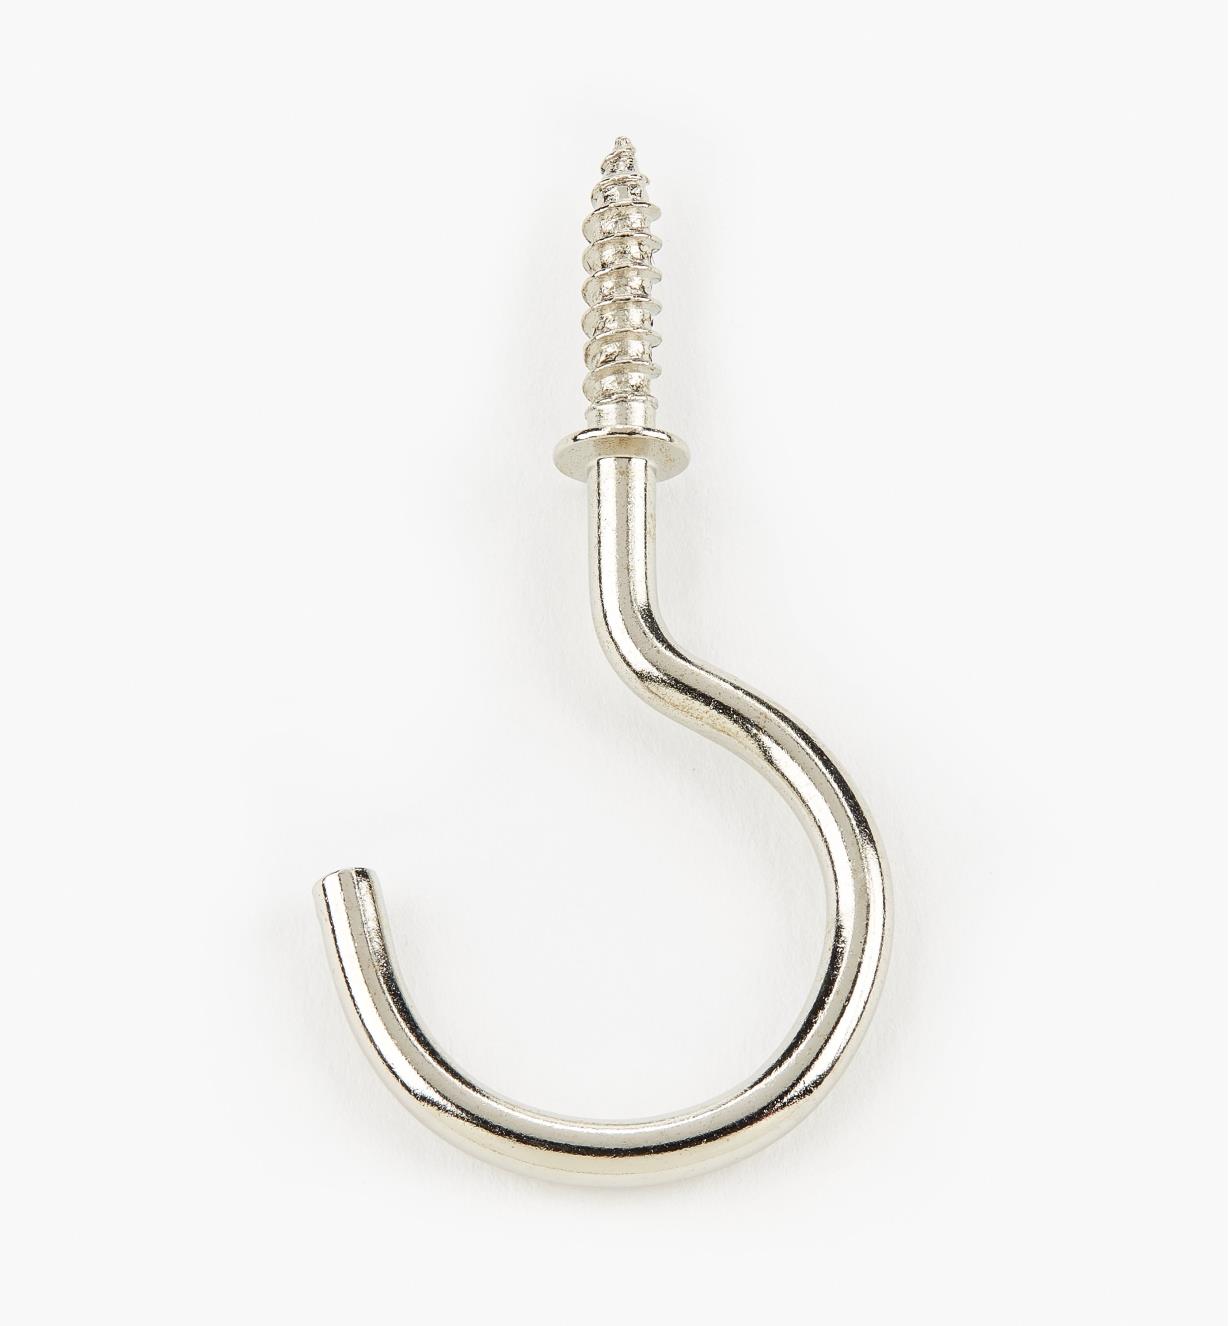 00S5635 - 1 1/2" Nickel-Plated Cup Hooks (50)